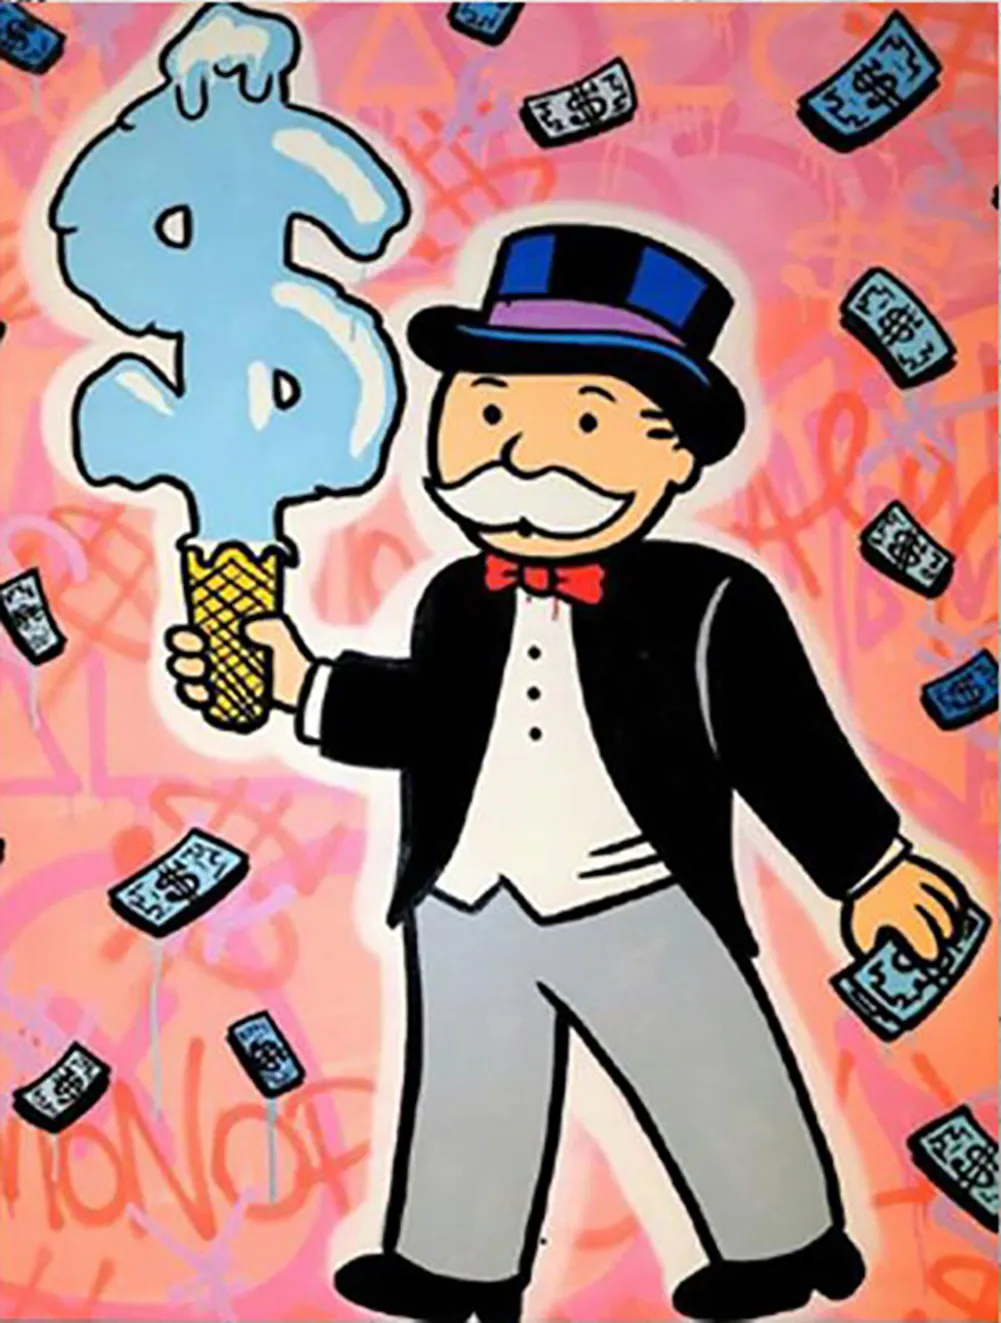 Alec Monopoly Dollar Oil Painting On Canvas Home Decor Handcrafts /HD Print Wall Art Picture Customization is acceptable 21081413